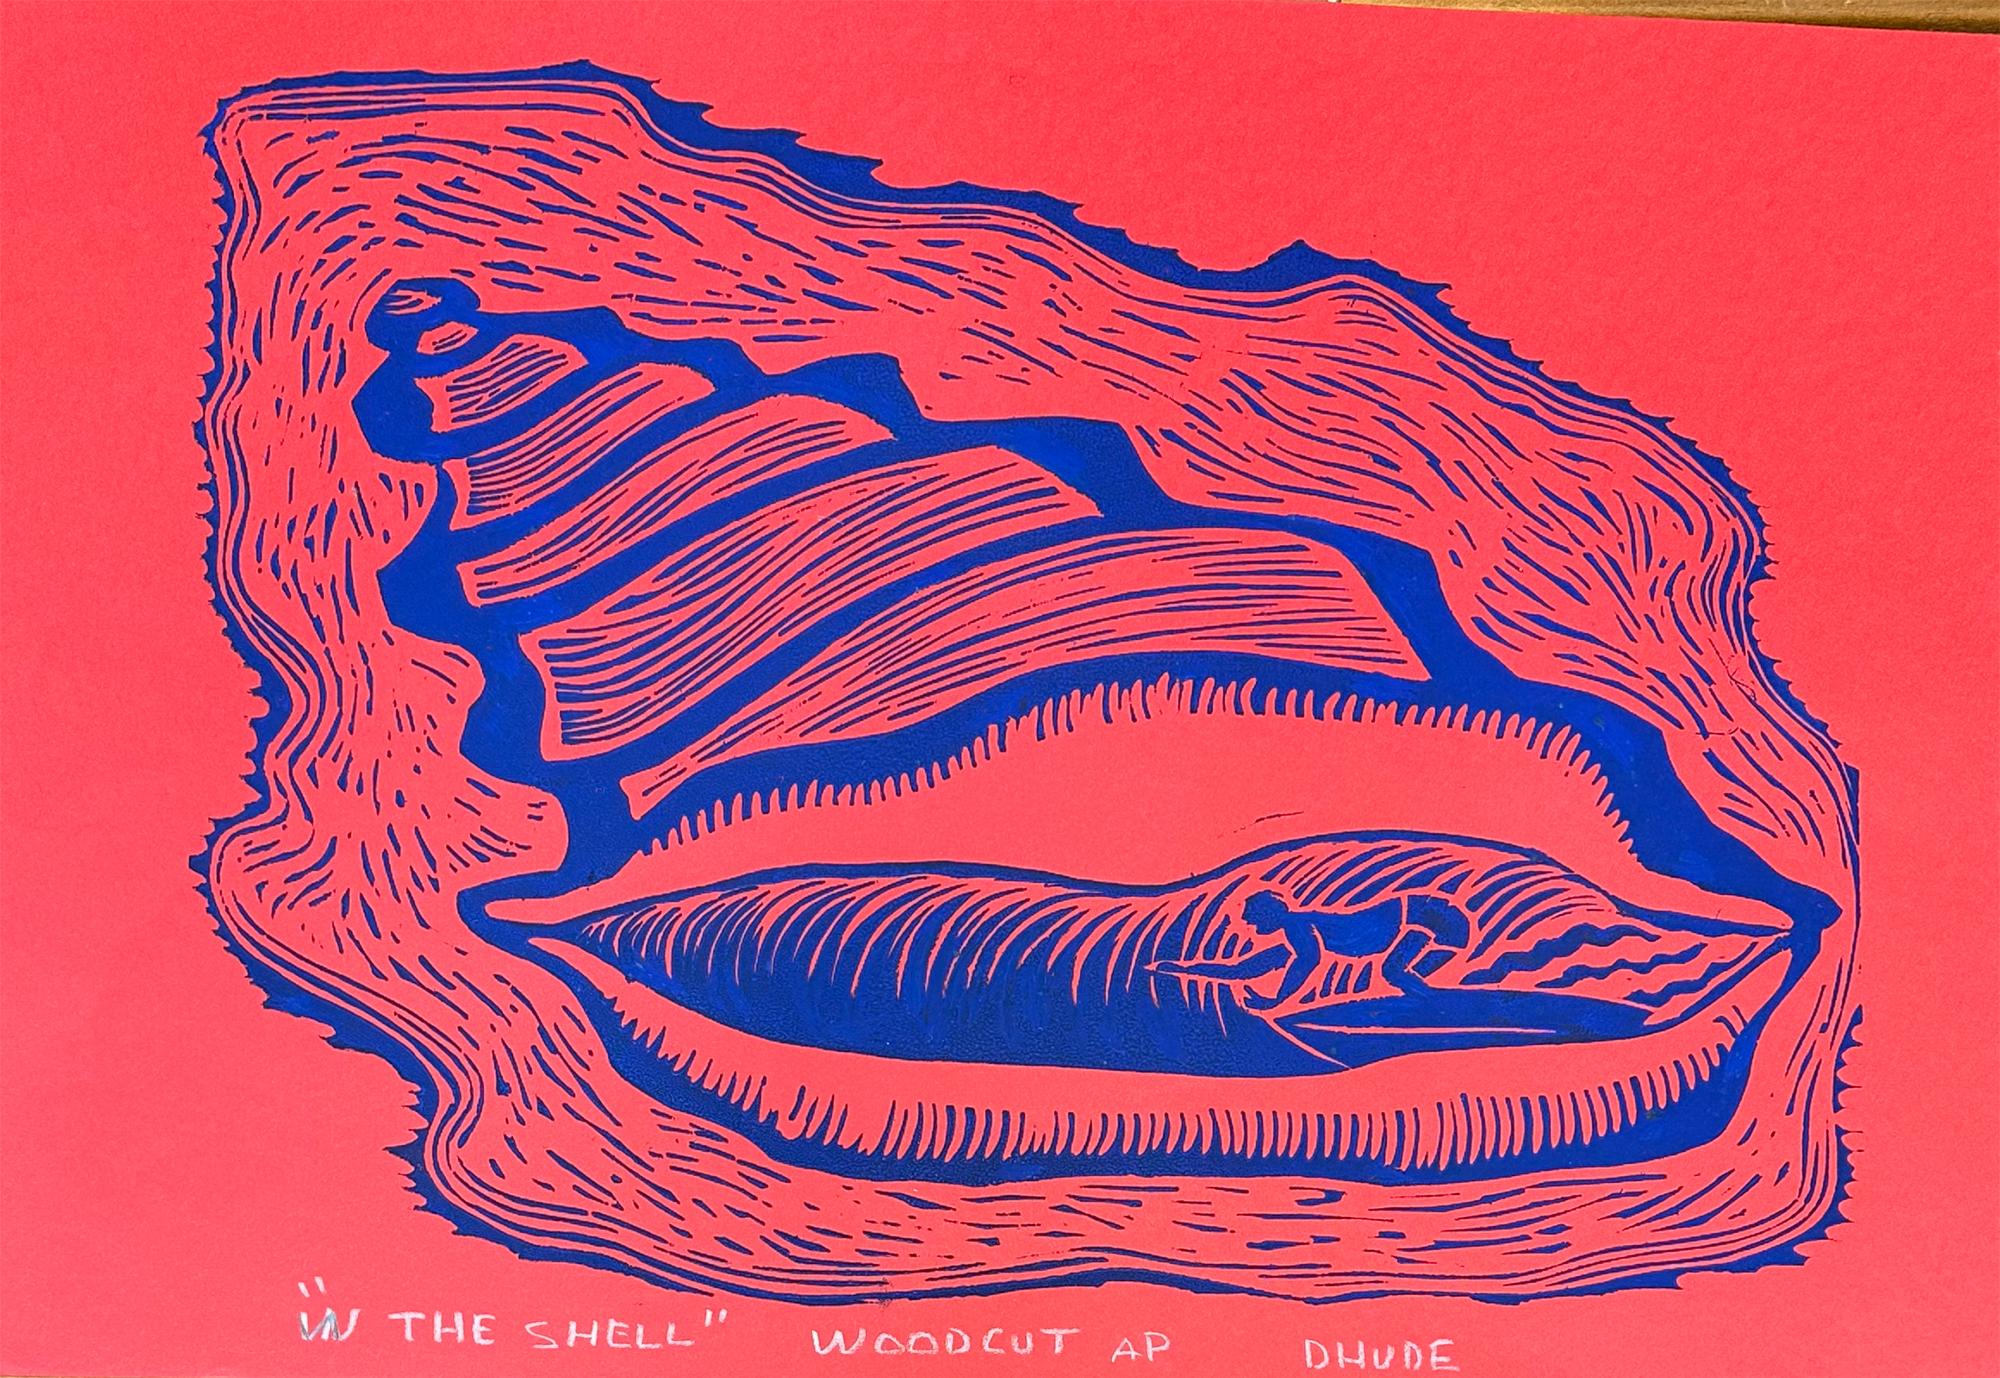 In The Shell - Surfing Art - Figurative - Woodcut Print By Marc Zimmerman

Limited Edition 01/04

This masterwork is exhibited in the Zimmerman Gallery, Carmel CA.

Immerse yourself in the captivating world of surfing and ocean vibes with Marc